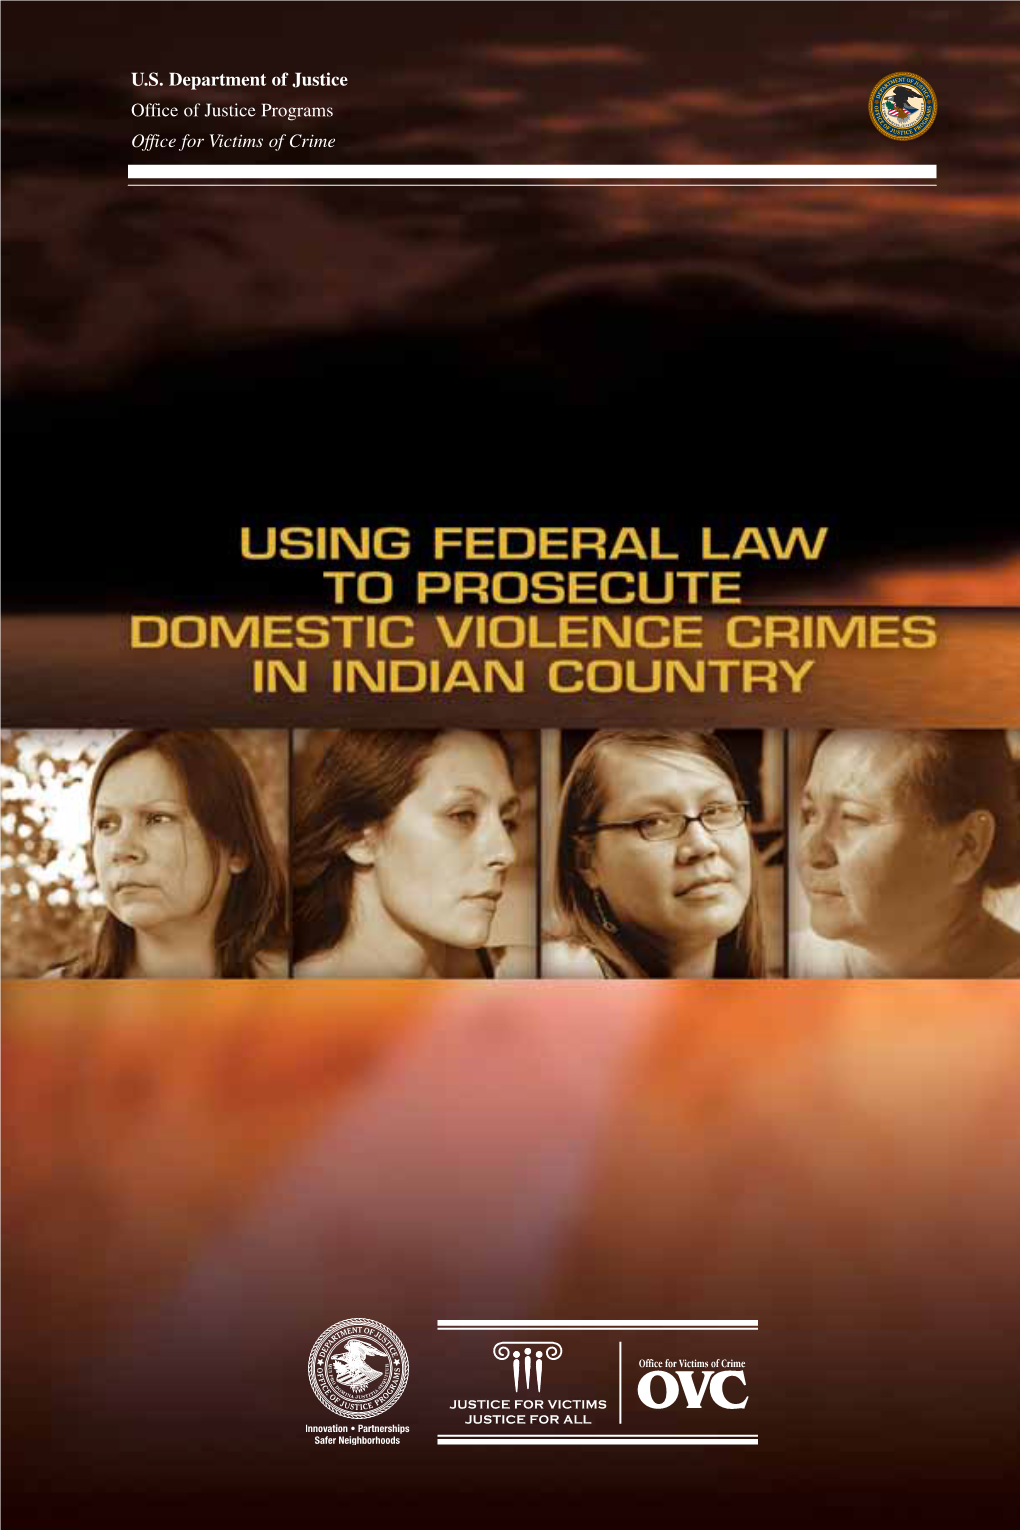 Using Federal Law to Prosecute Domestic Violence Crimes in Indian